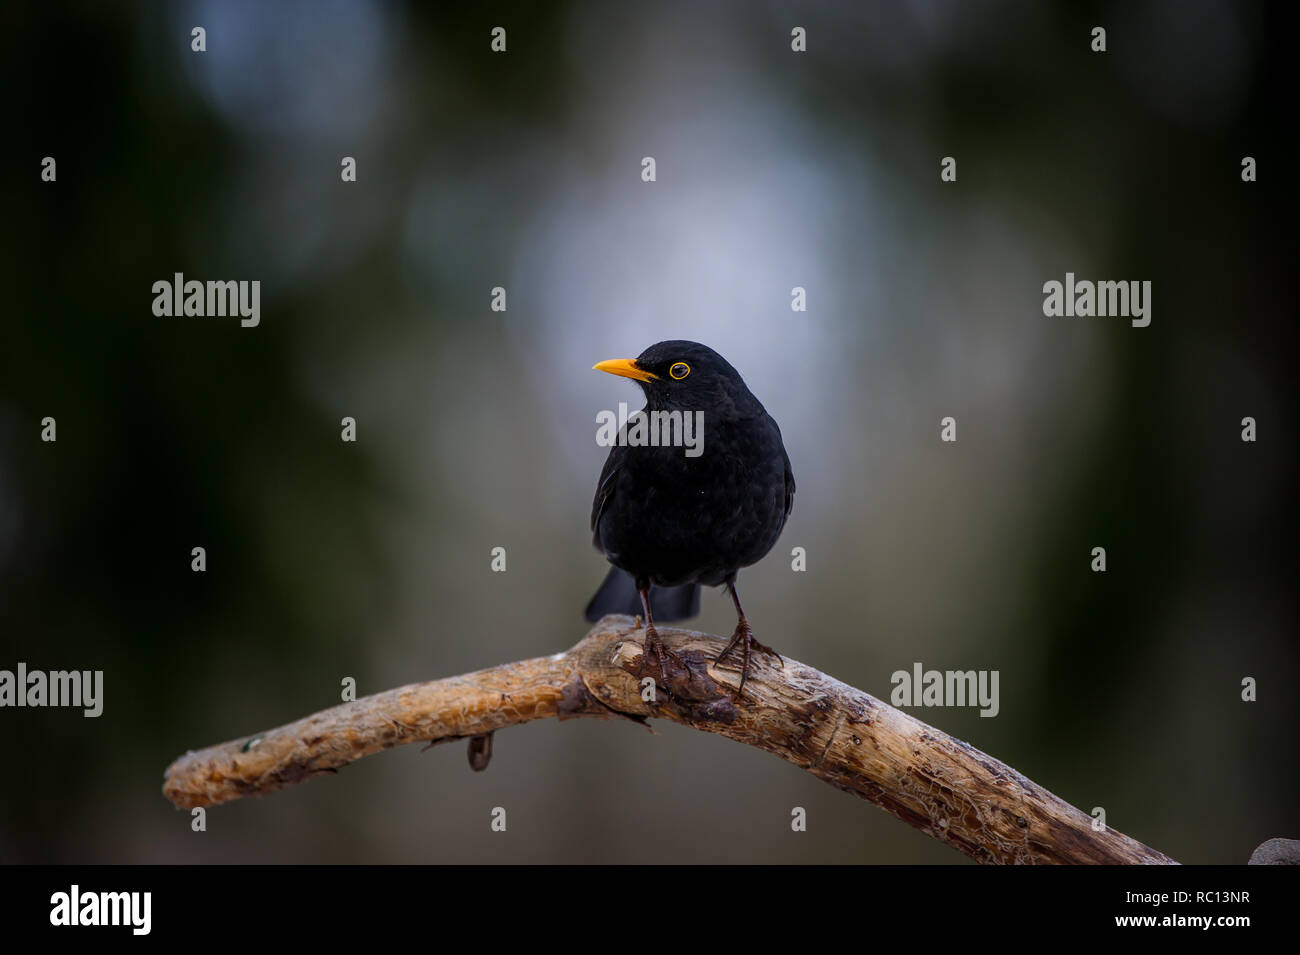 Male blackbird (Turdus merula) with the yellow beak perching on an old pine branch with a defocused background Stock Photo